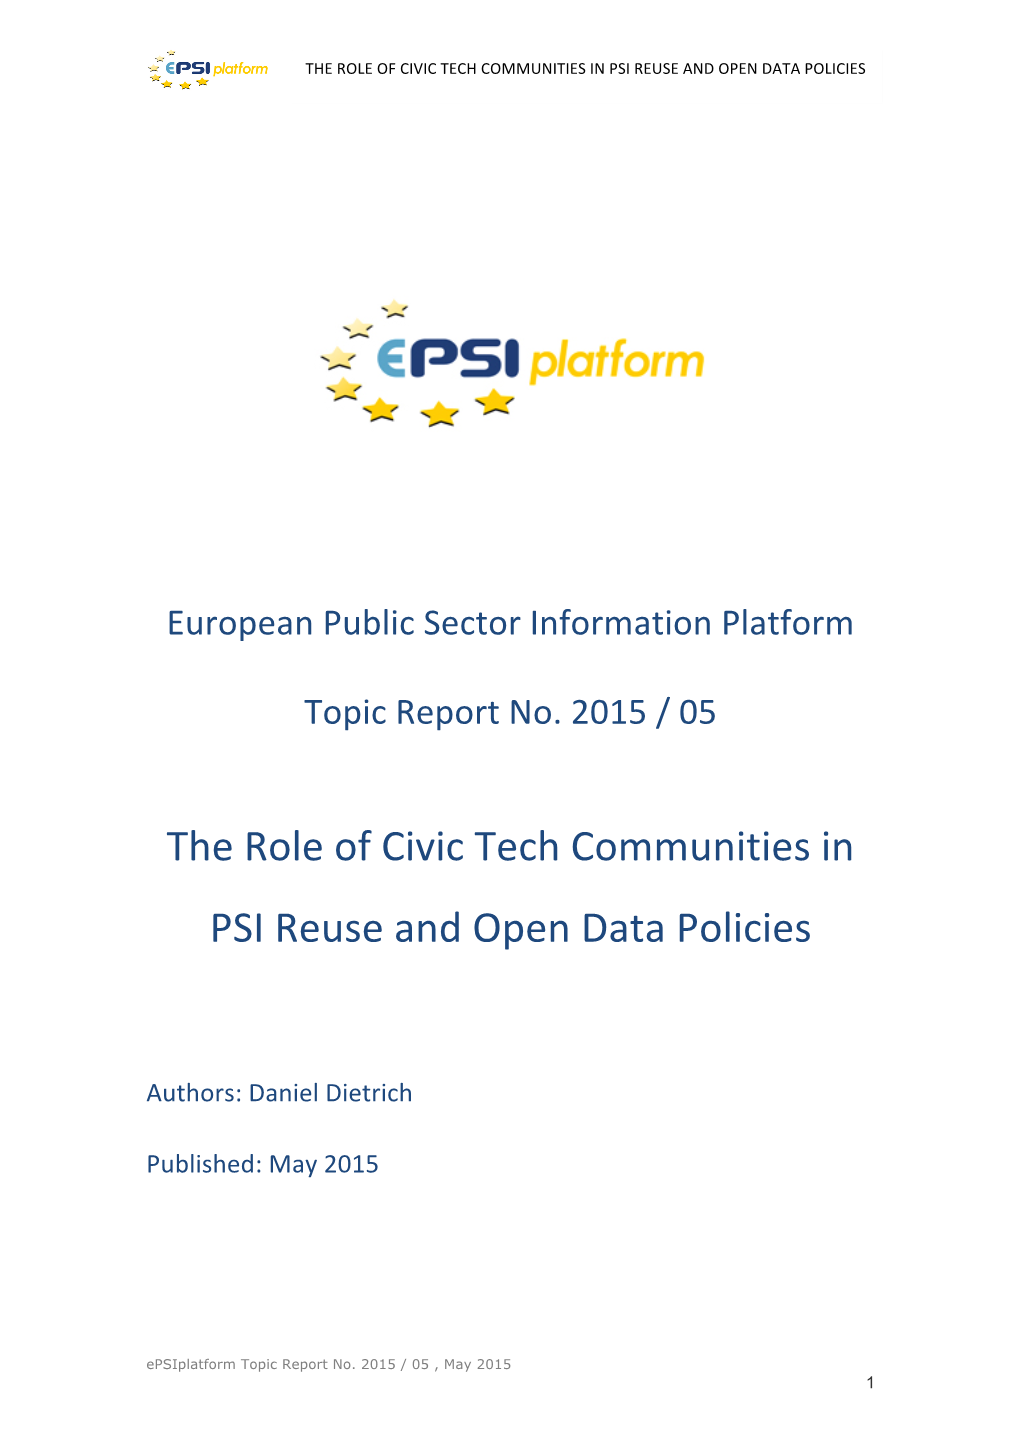 The Role of Civic Tech Communities in Psi Reuse and Open Data Policies